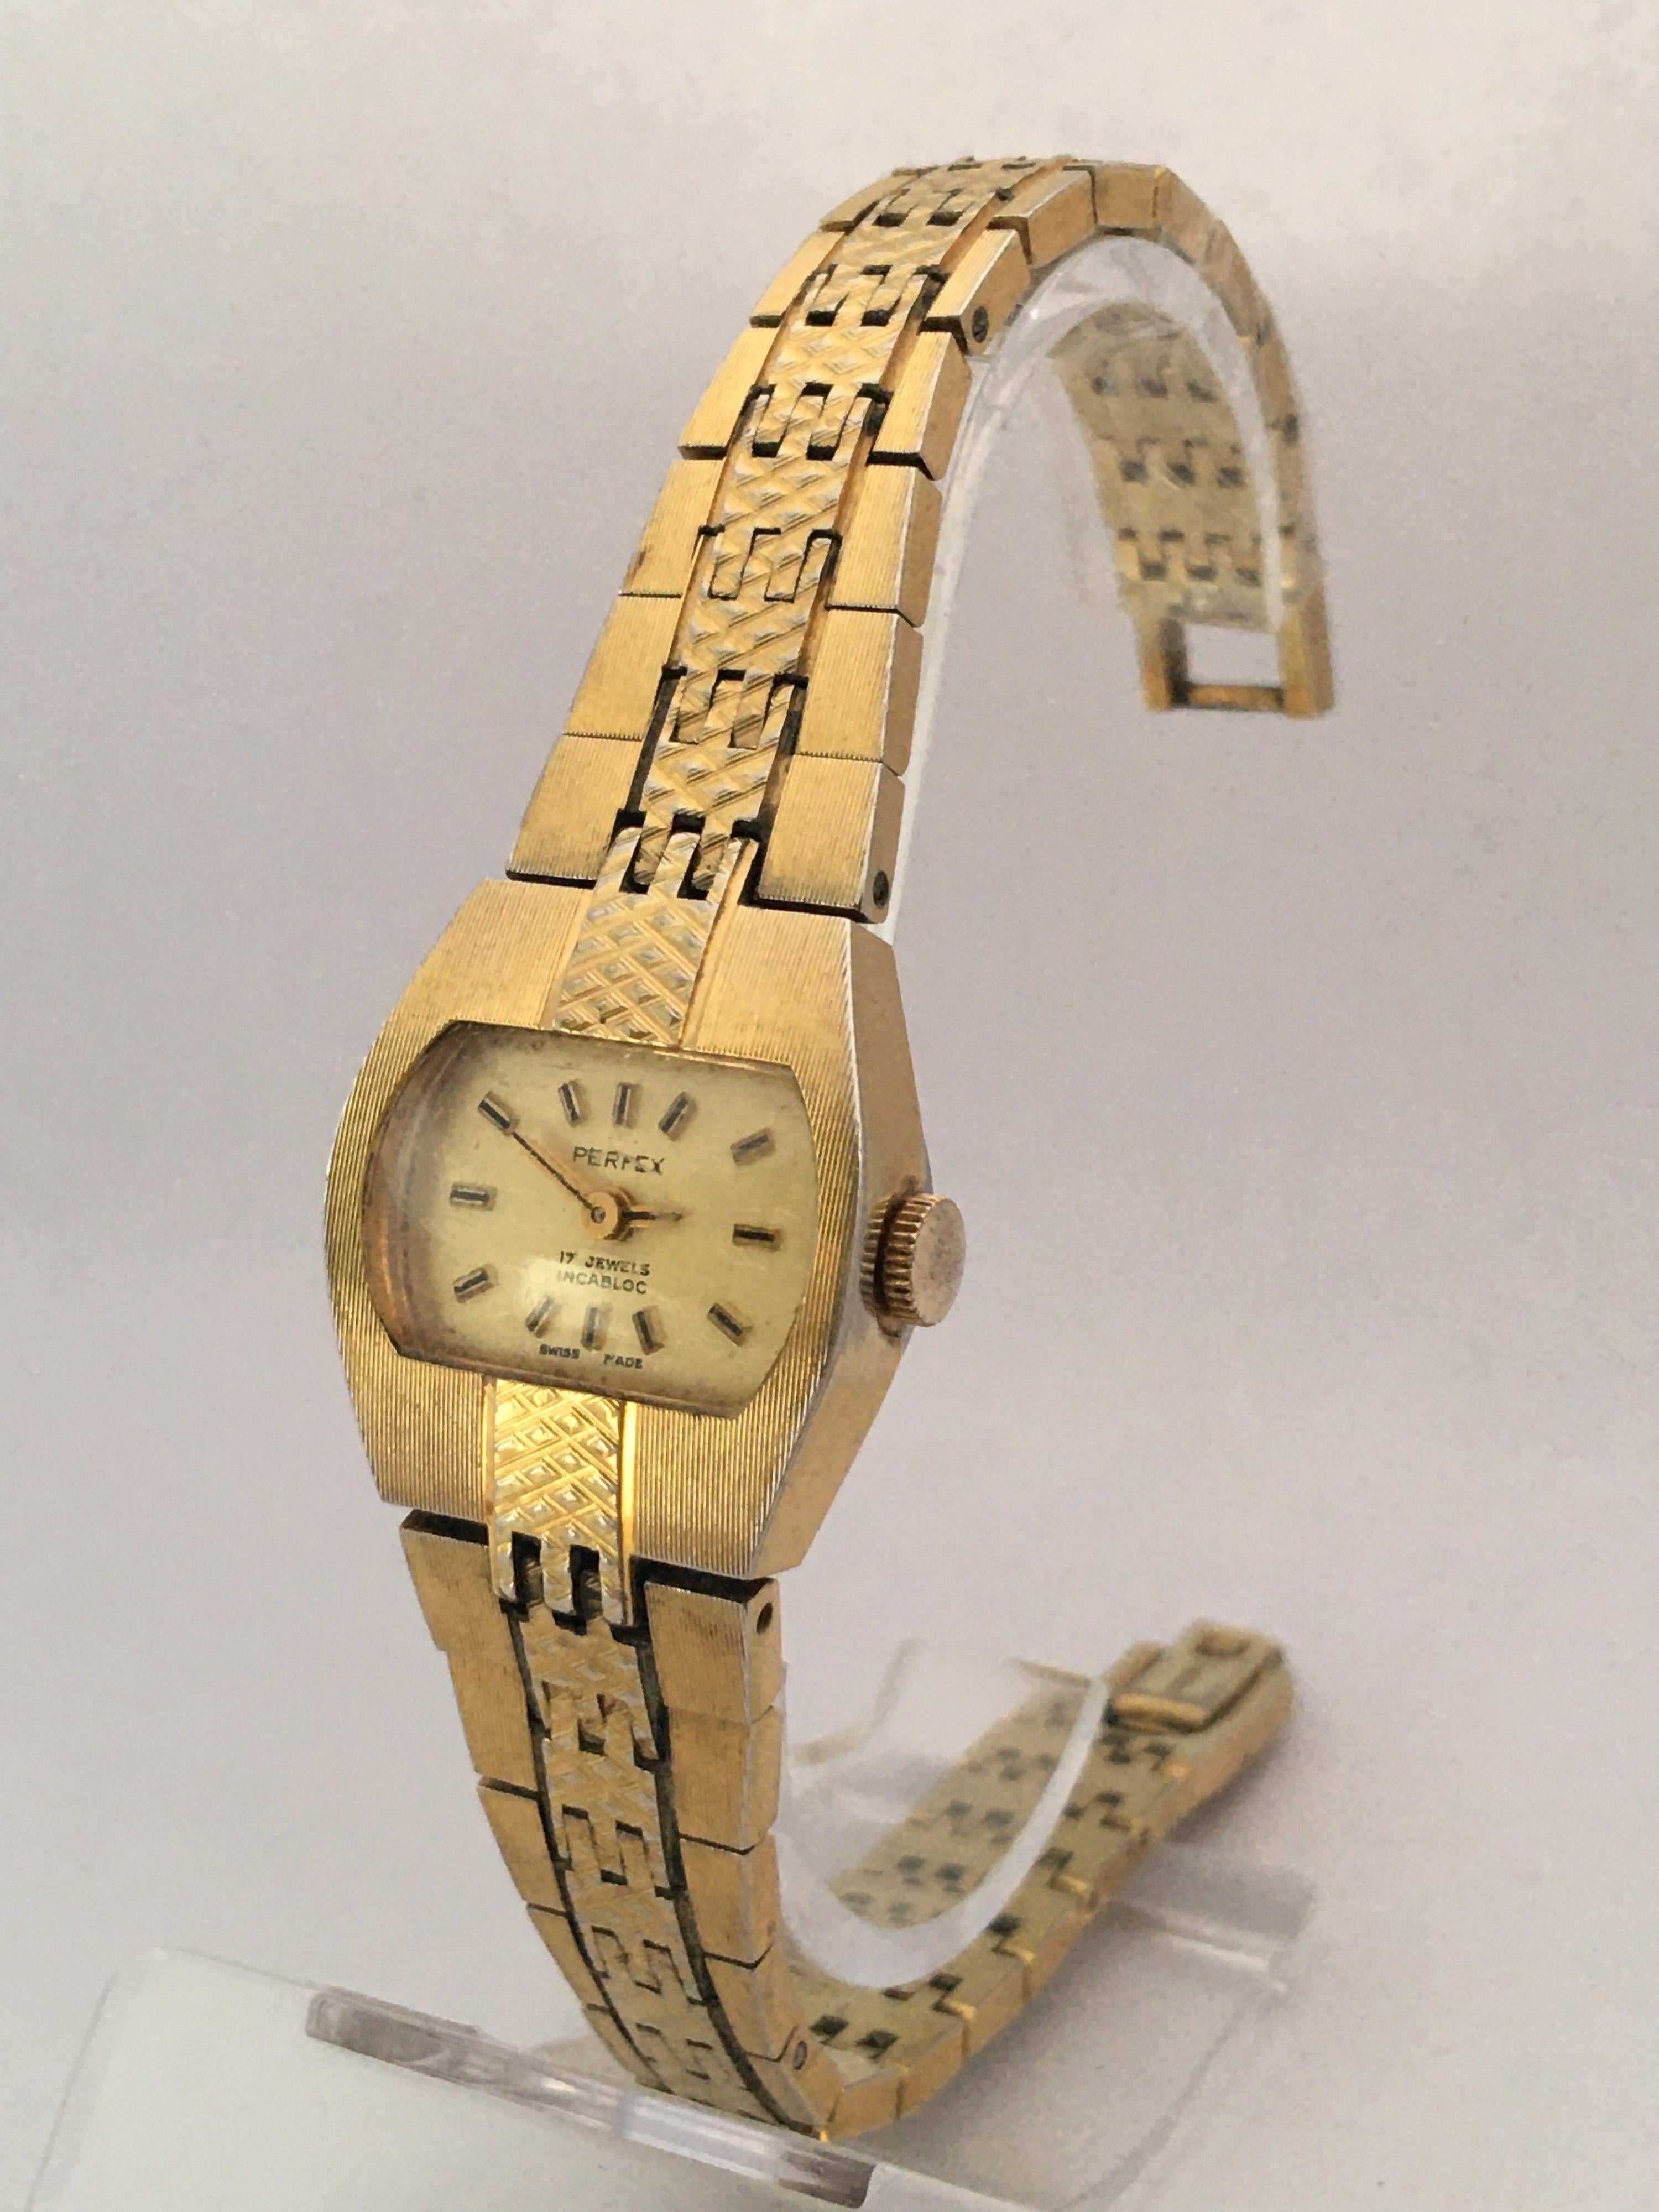 This beautiful vintage hand winding ladies watch is in good working condition and it is running well. Visible signs of ageing and wear with minor light scratches on the glass and tarnishes on the watch case and bracelet. Watch and bracelet is